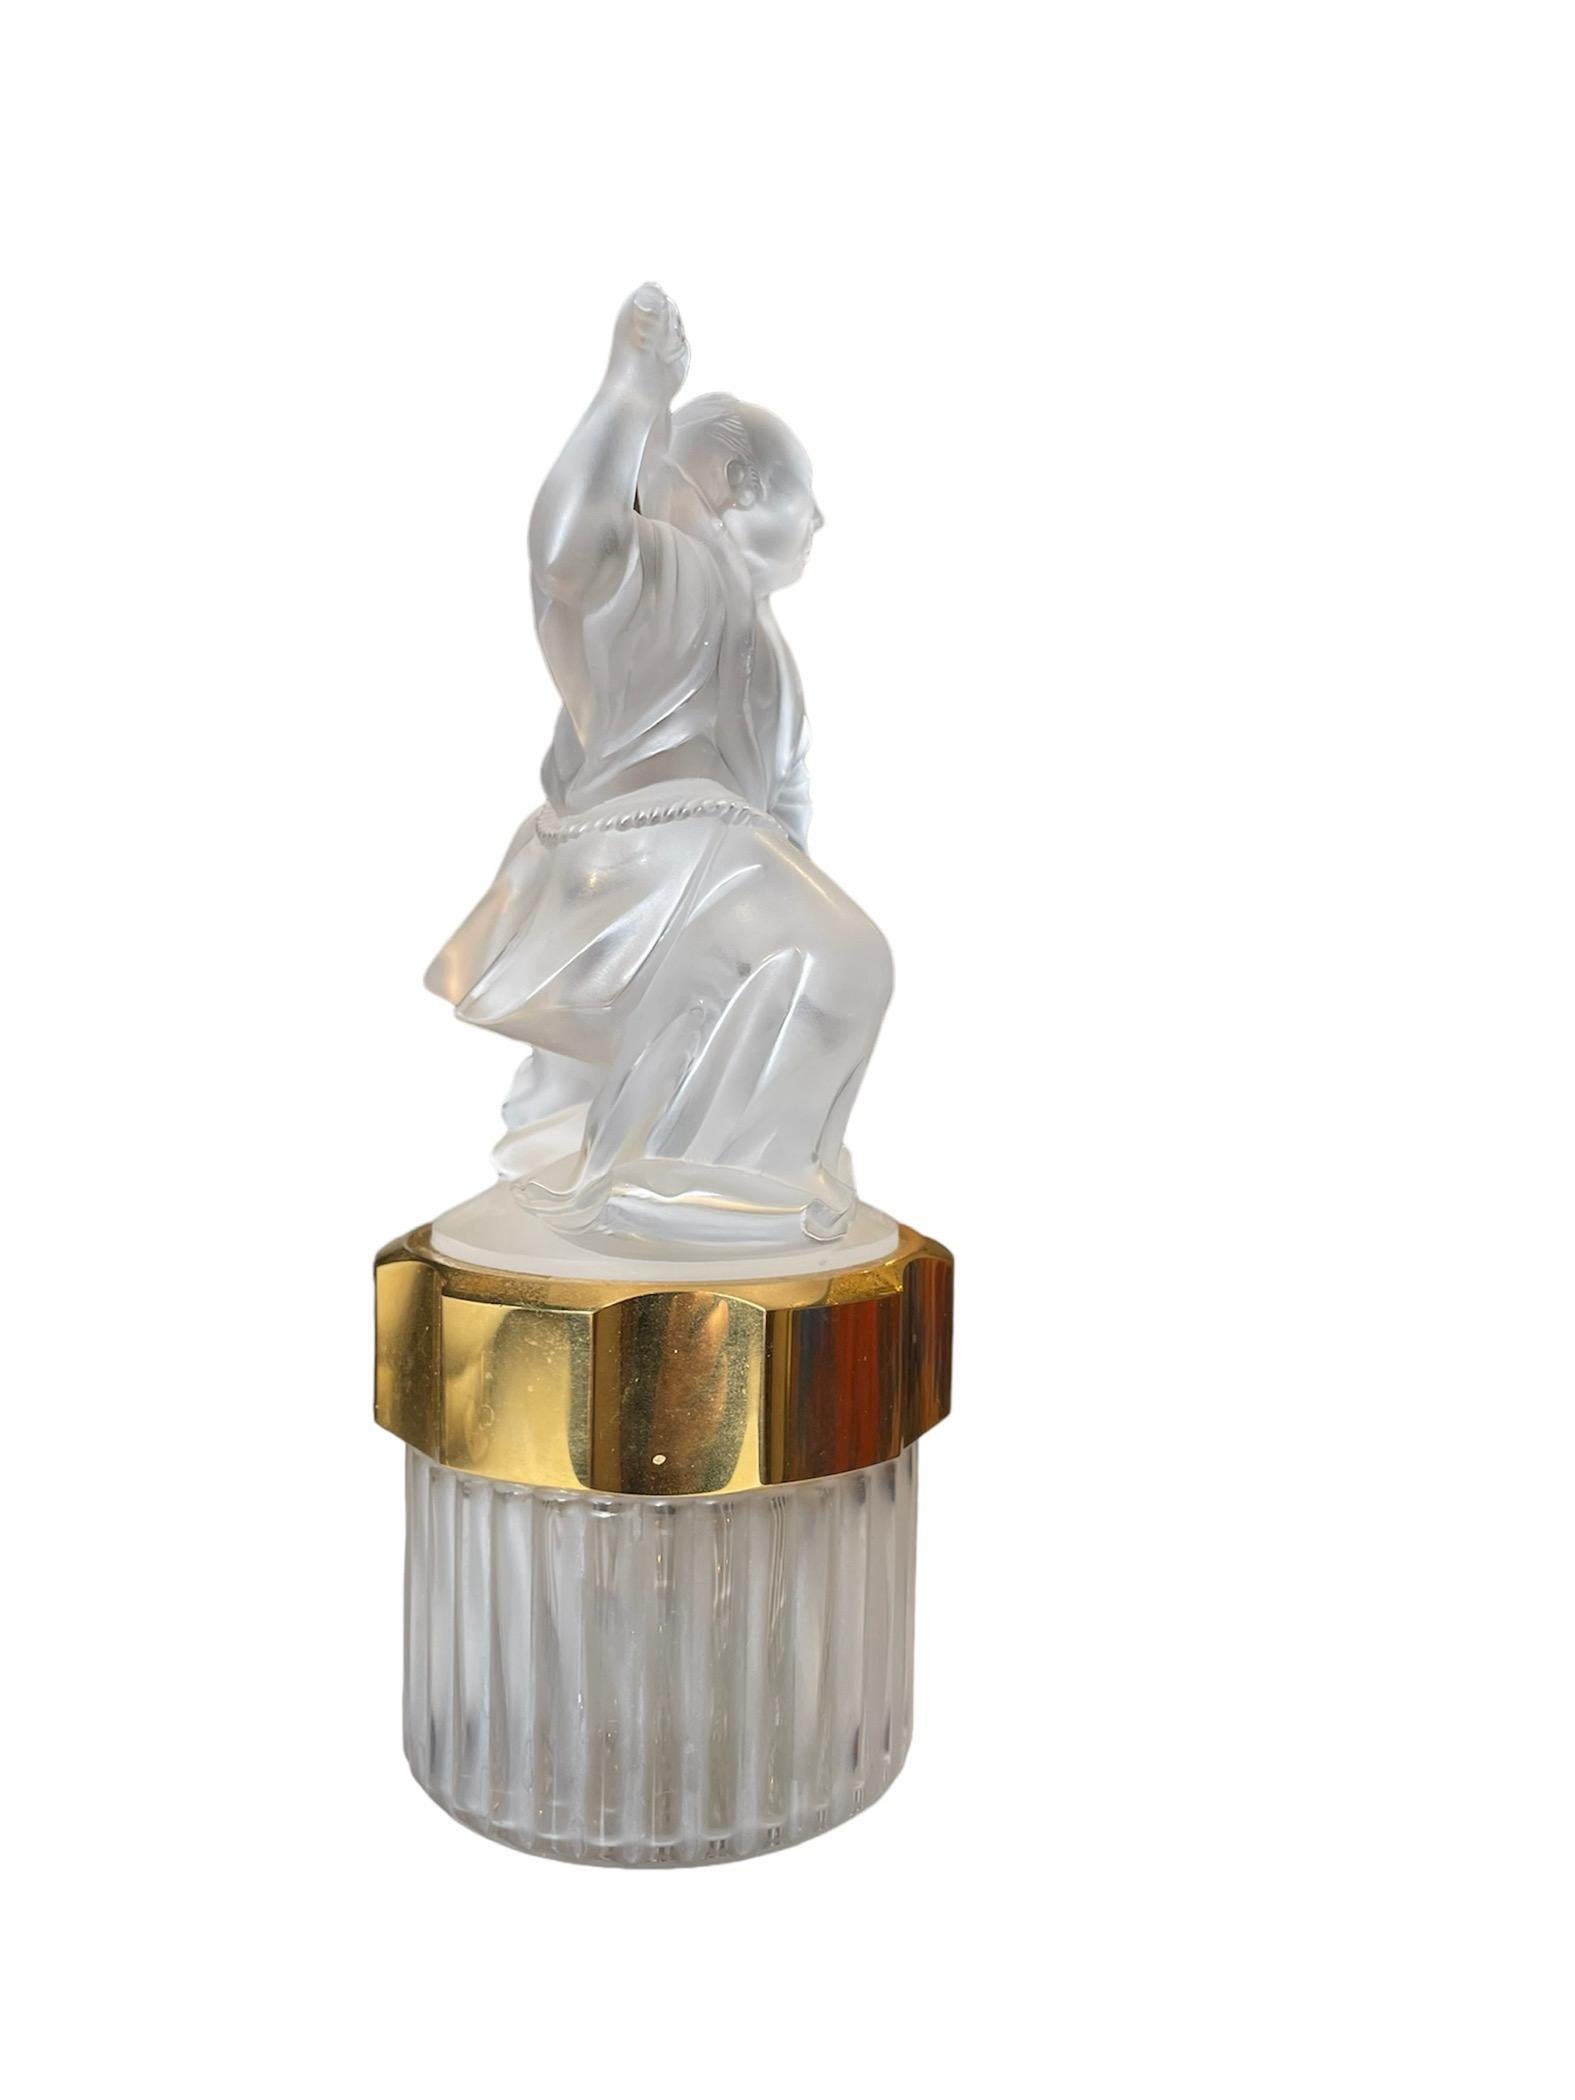 This is a Lalique Crystal Sculpture Perfume Bottle. It depicts a clear and frosted crystal Samurai sculpture standing over a round crystal bottle that is covered by a gold tone plastic round lid. The clear and frosted cylindrical bottle is ribbed.